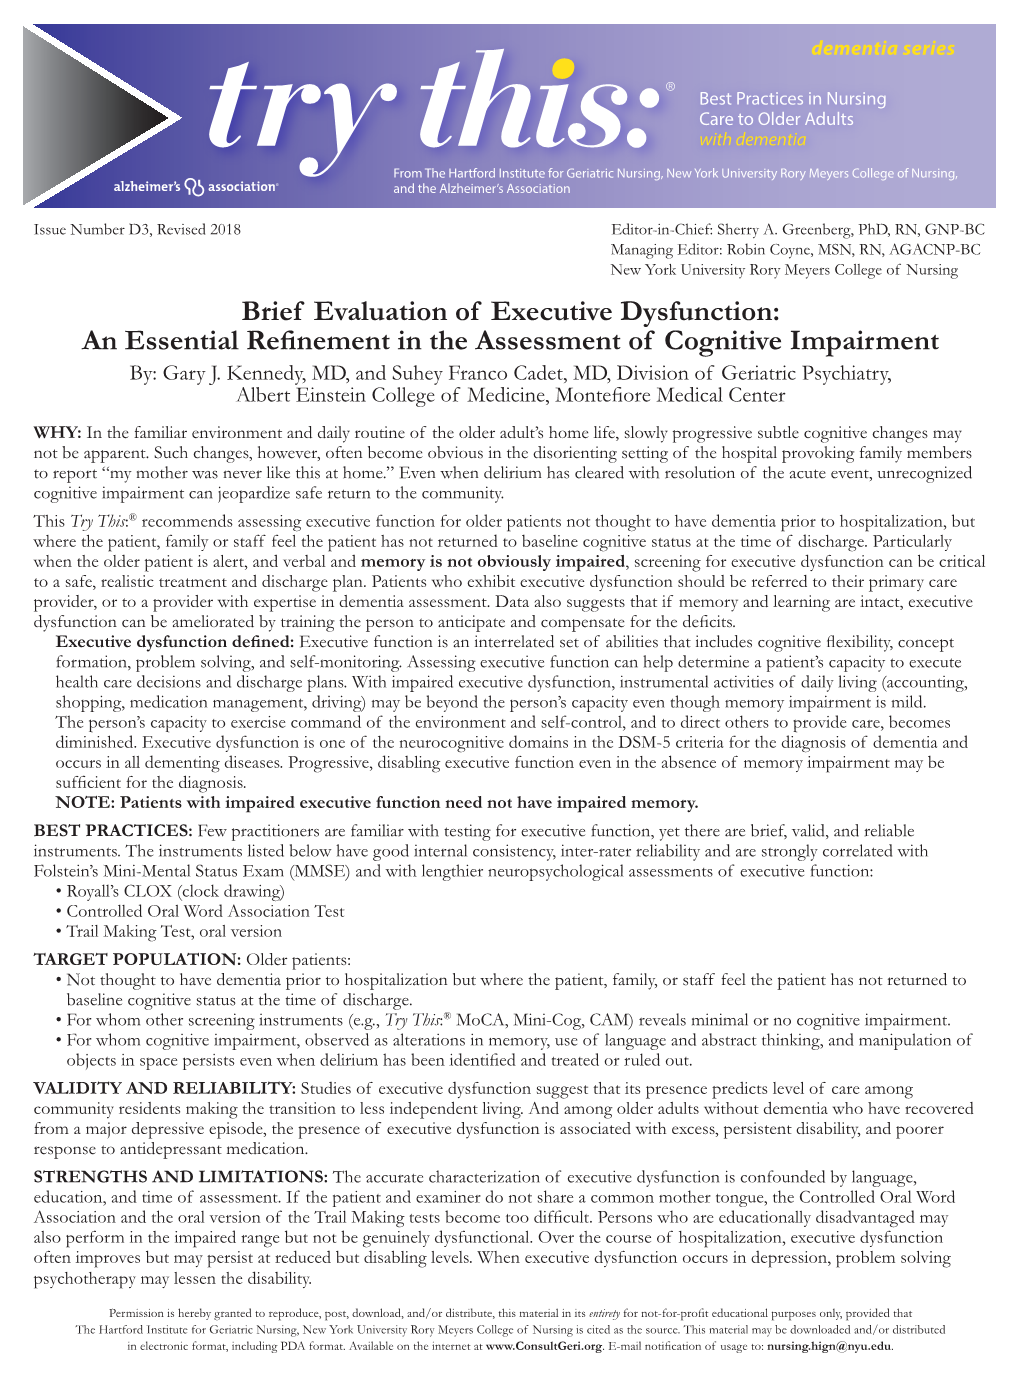 Brief Evaluation of Executive Dysfunction: an Essential Refinement in the Assessment of Cognitive Impairment By: Gary J